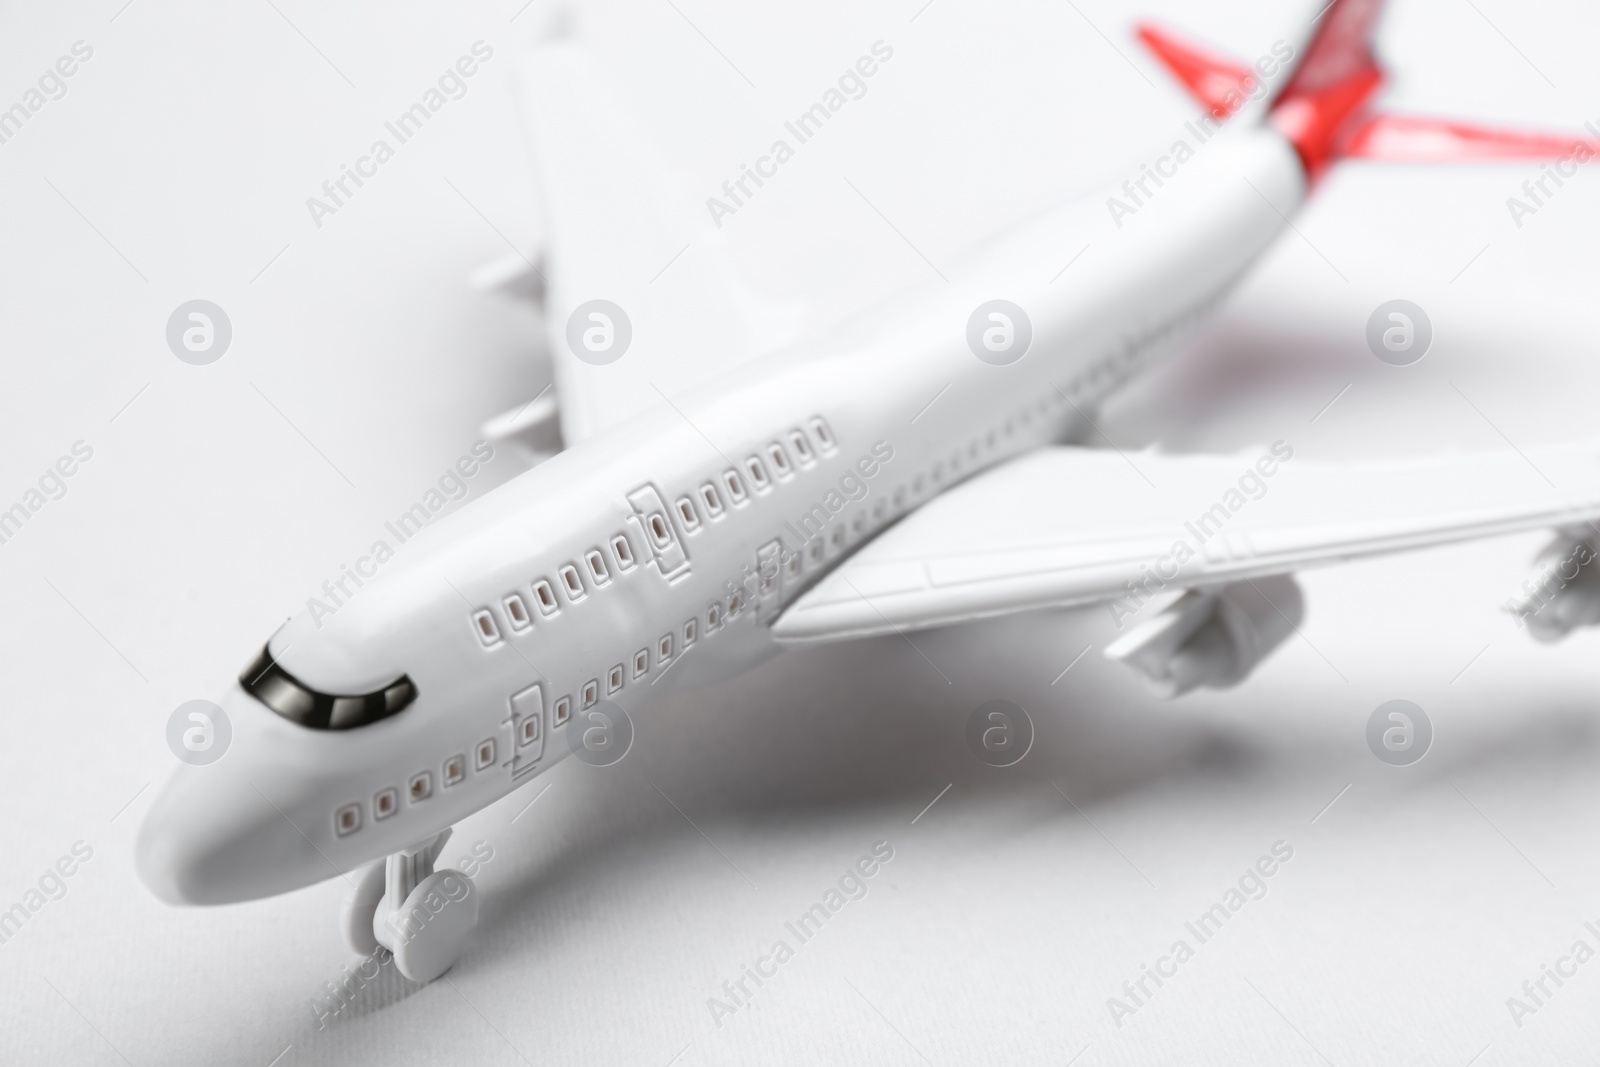 Photo of Toy airplane on light background, closeup view